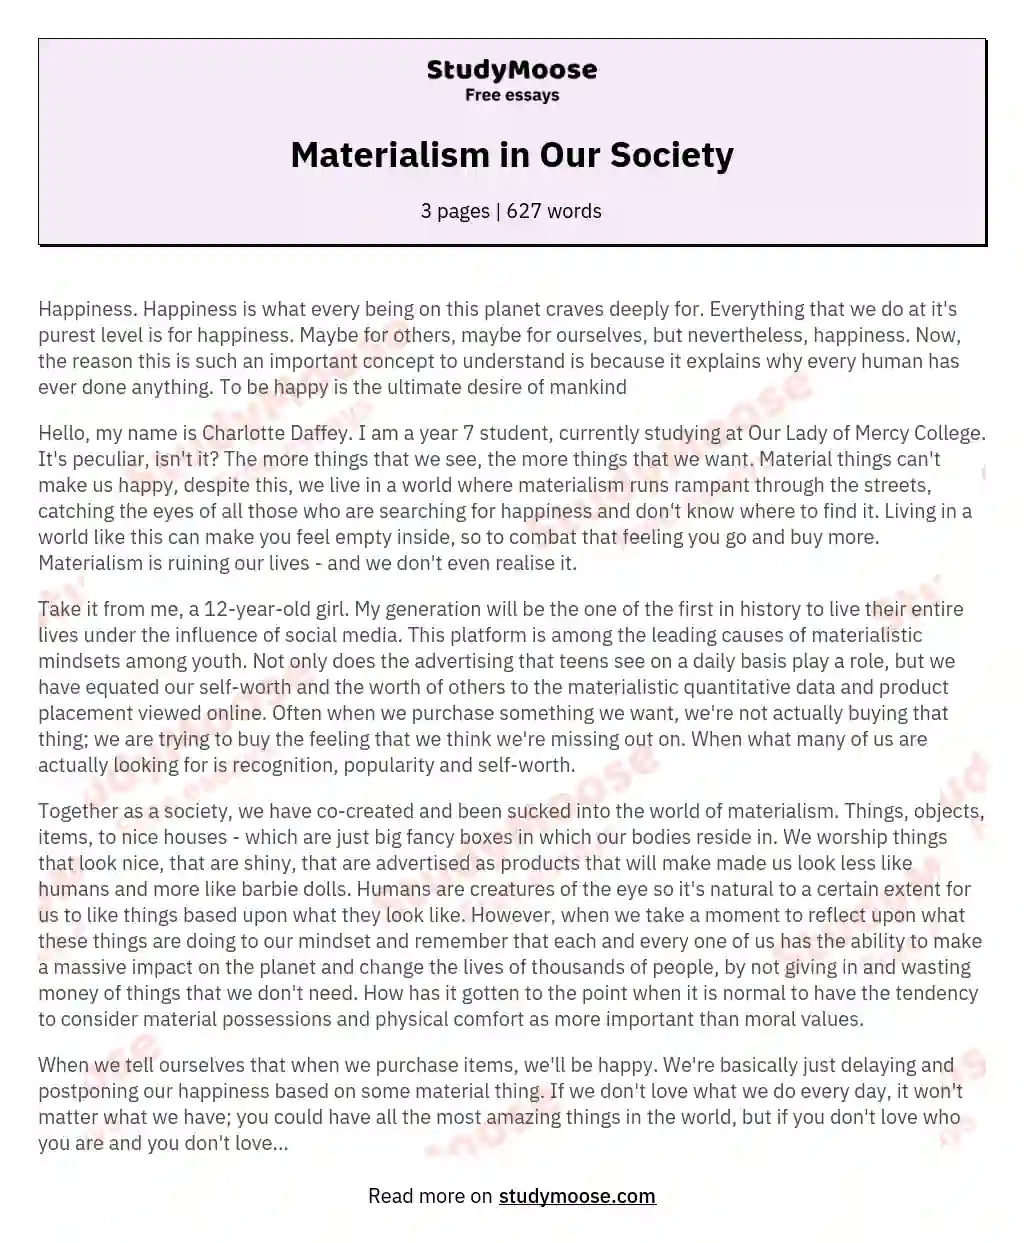 Materialism in Our Society essay